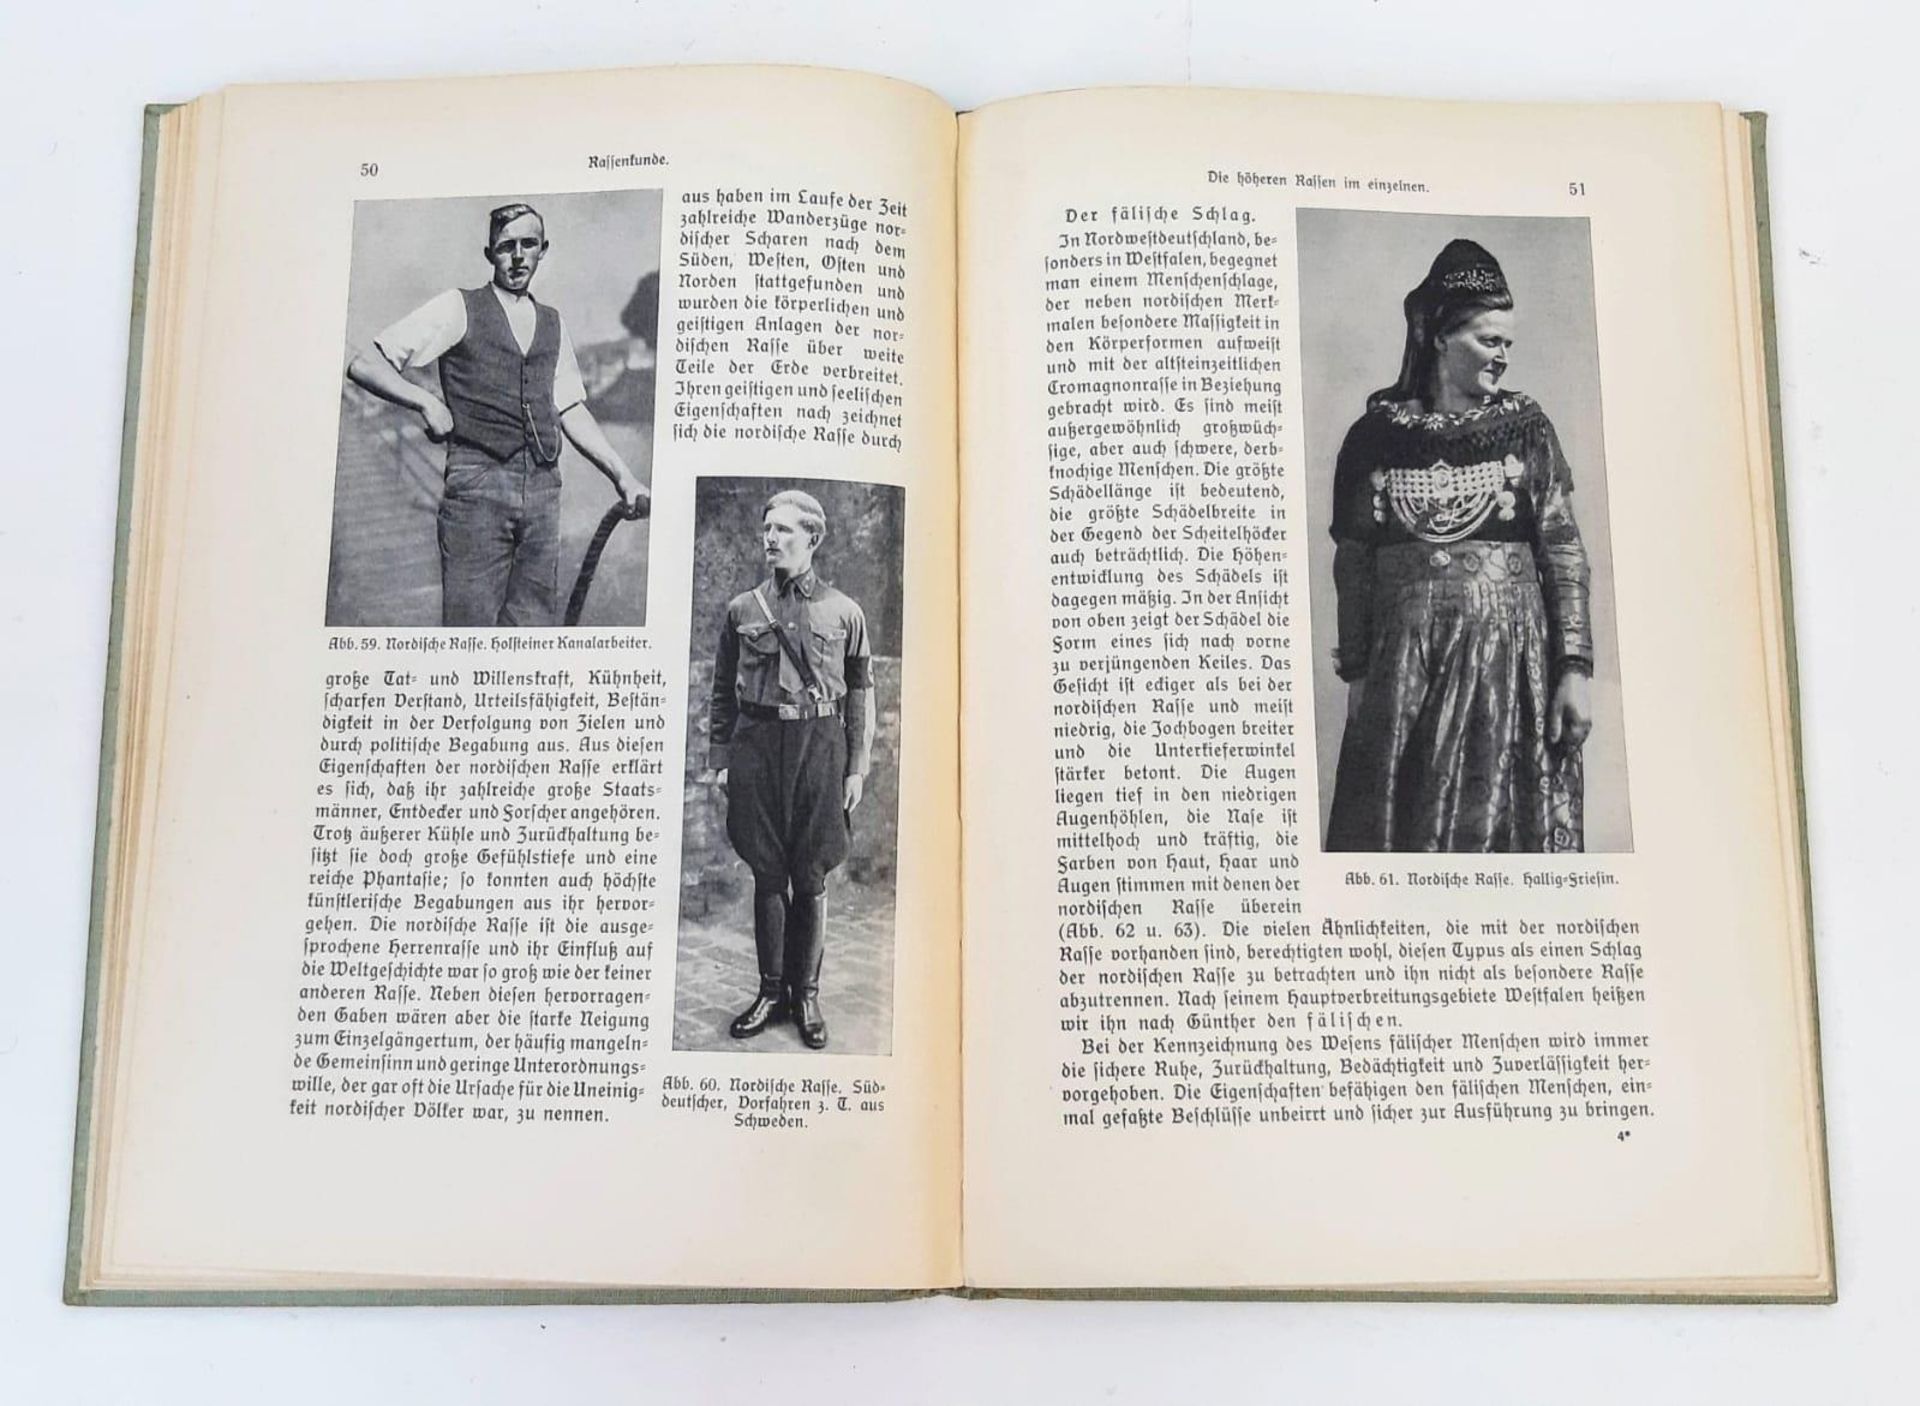 1934 Edition of the German Book Heredity, Racial Science, Racial Care. A Guide for self-study and - Image 4 of 5